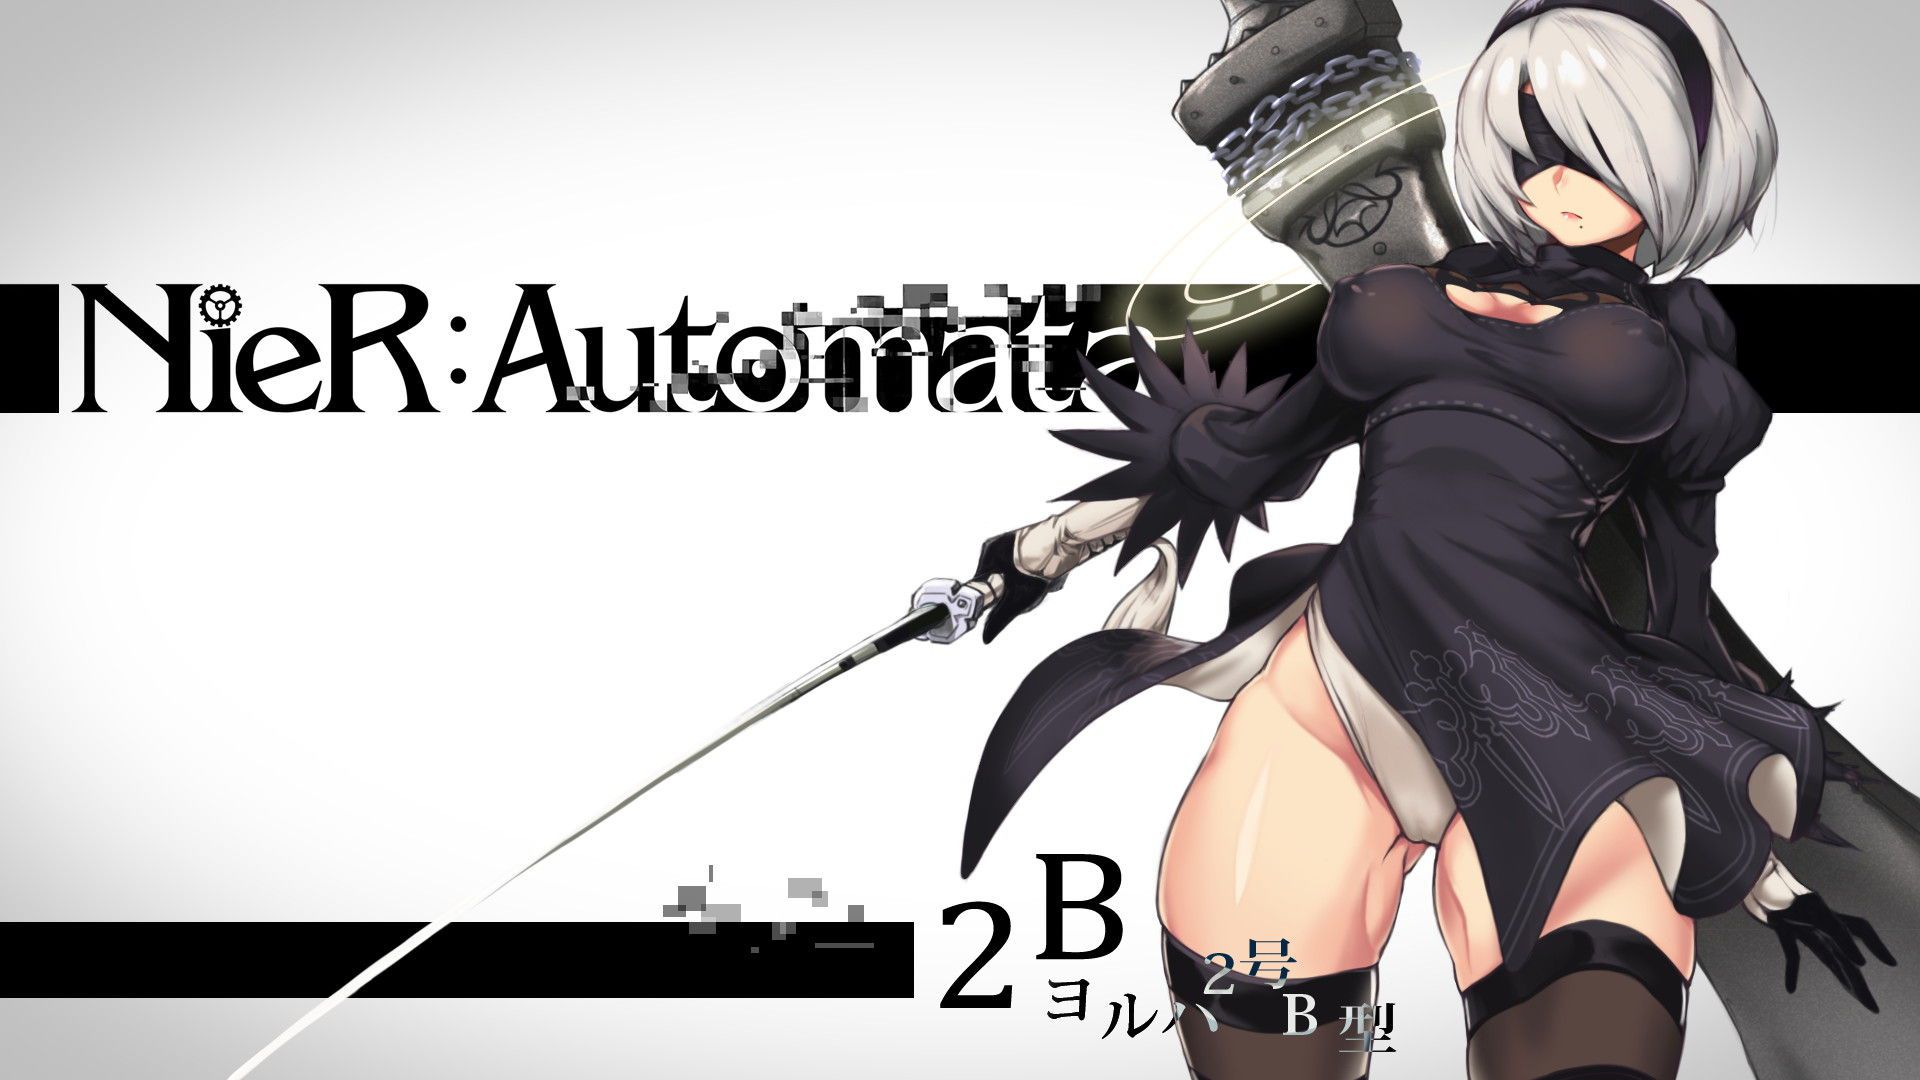 [With image] Yorha No. 2 B type production ban www (NieR Automata) in dark customs 9